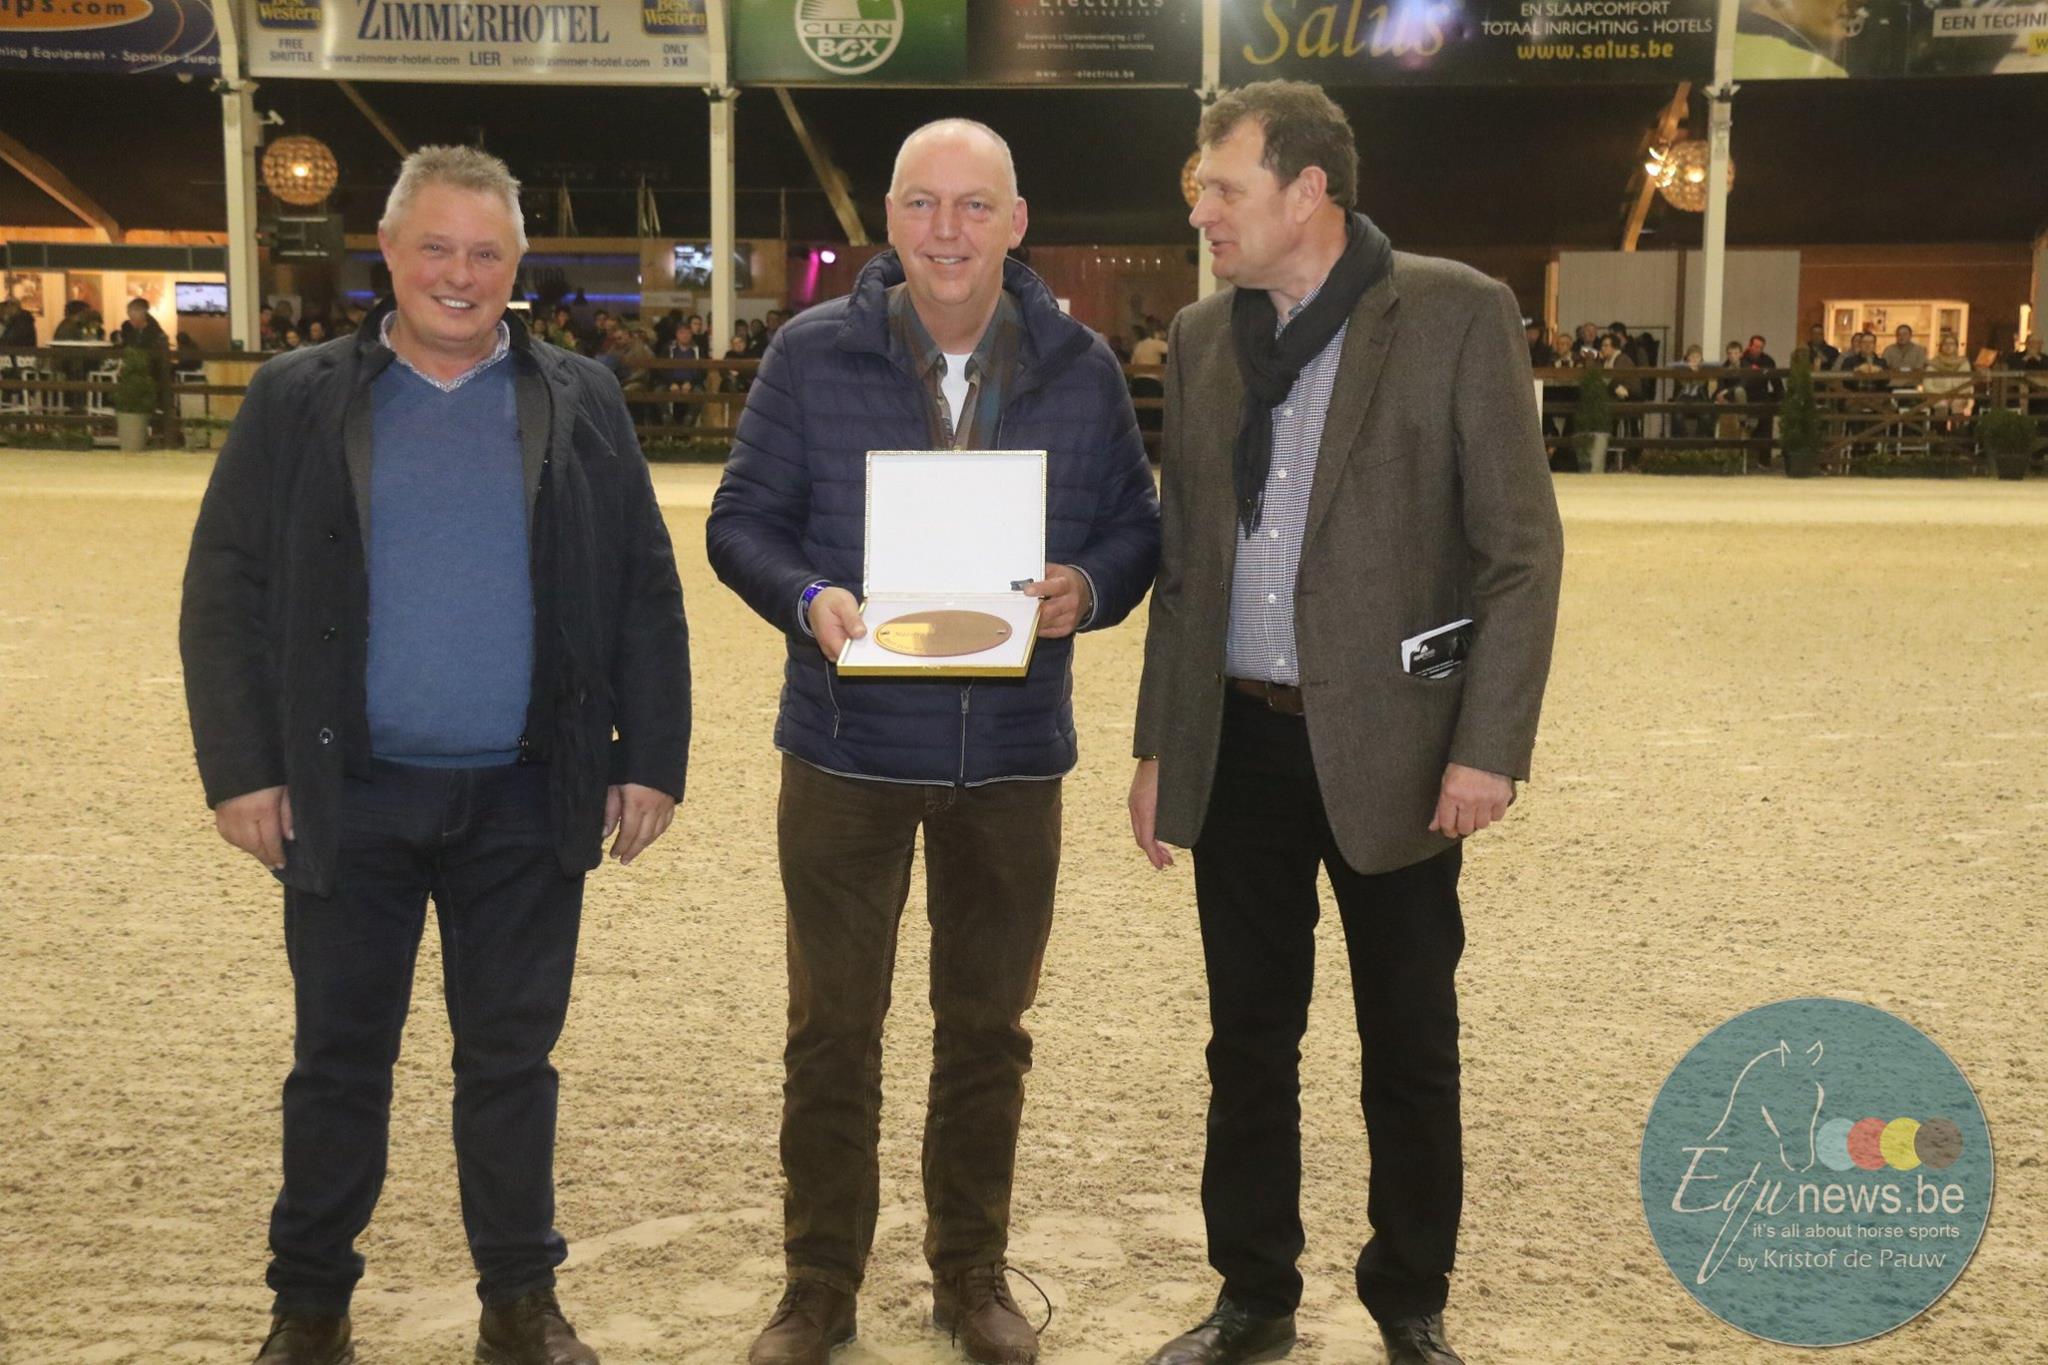 Kees Van den Oetelaar: "If we all want the same horse in 50 years, then we just have to keep going like this."